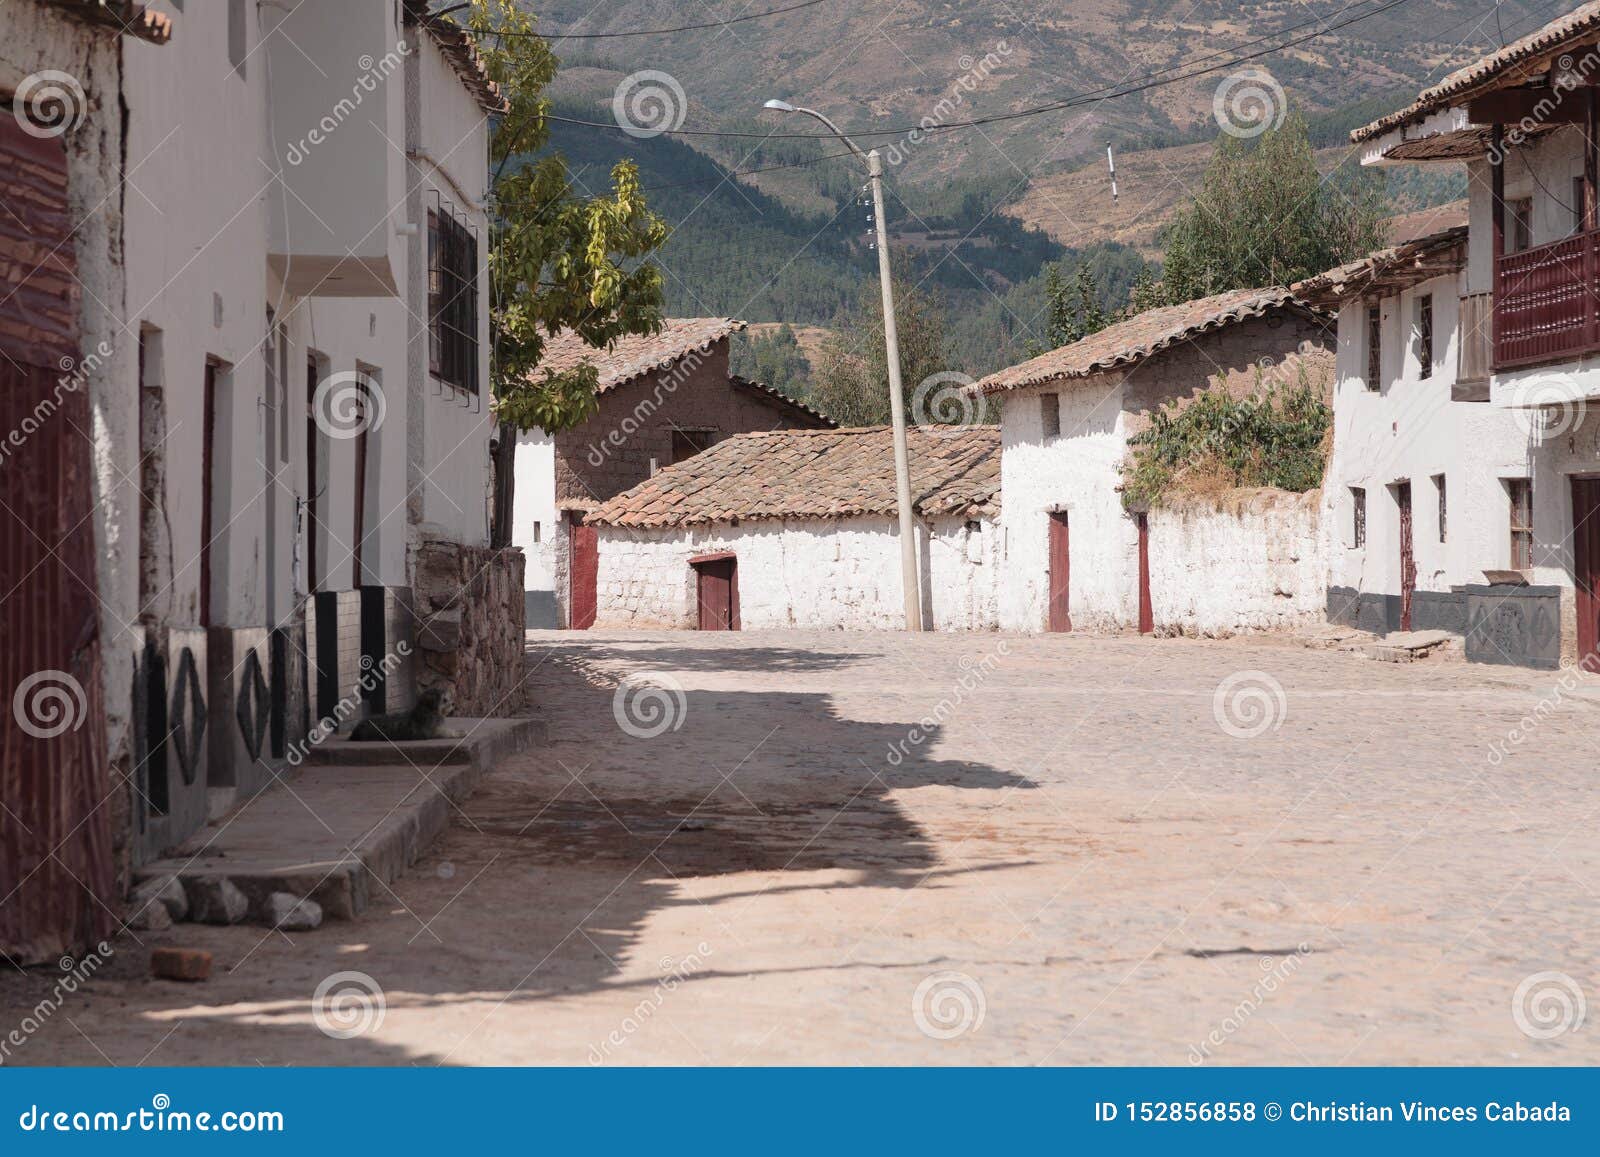 view of a street in pampa de quinua town